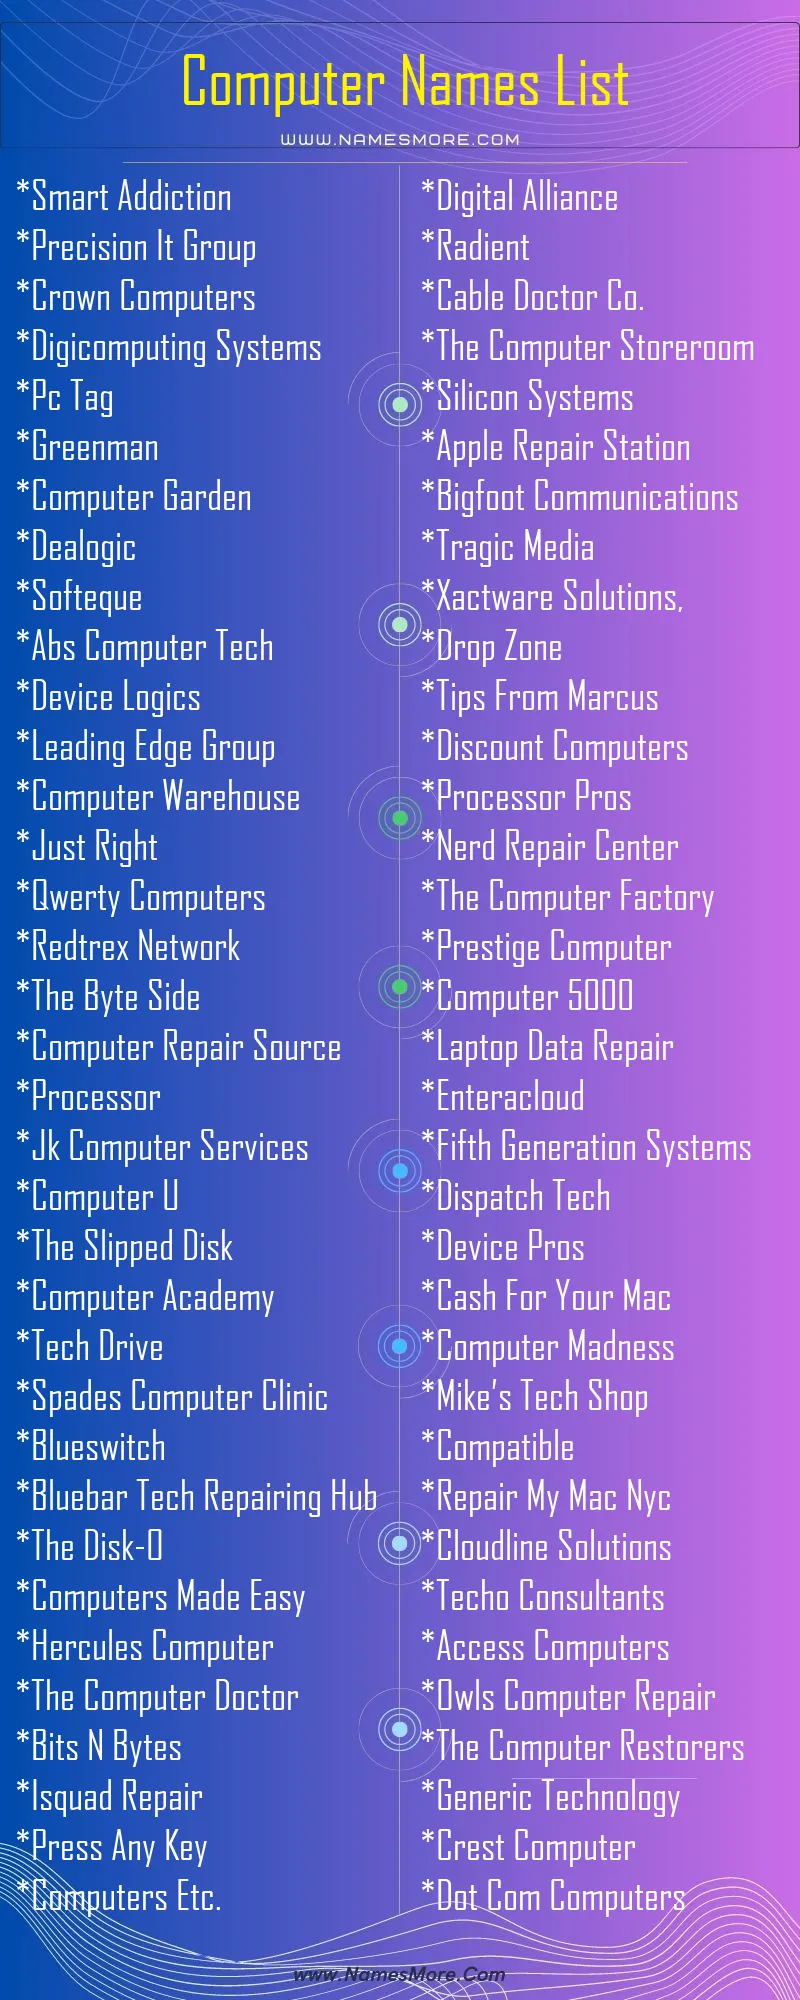 Computer Names List Infographic